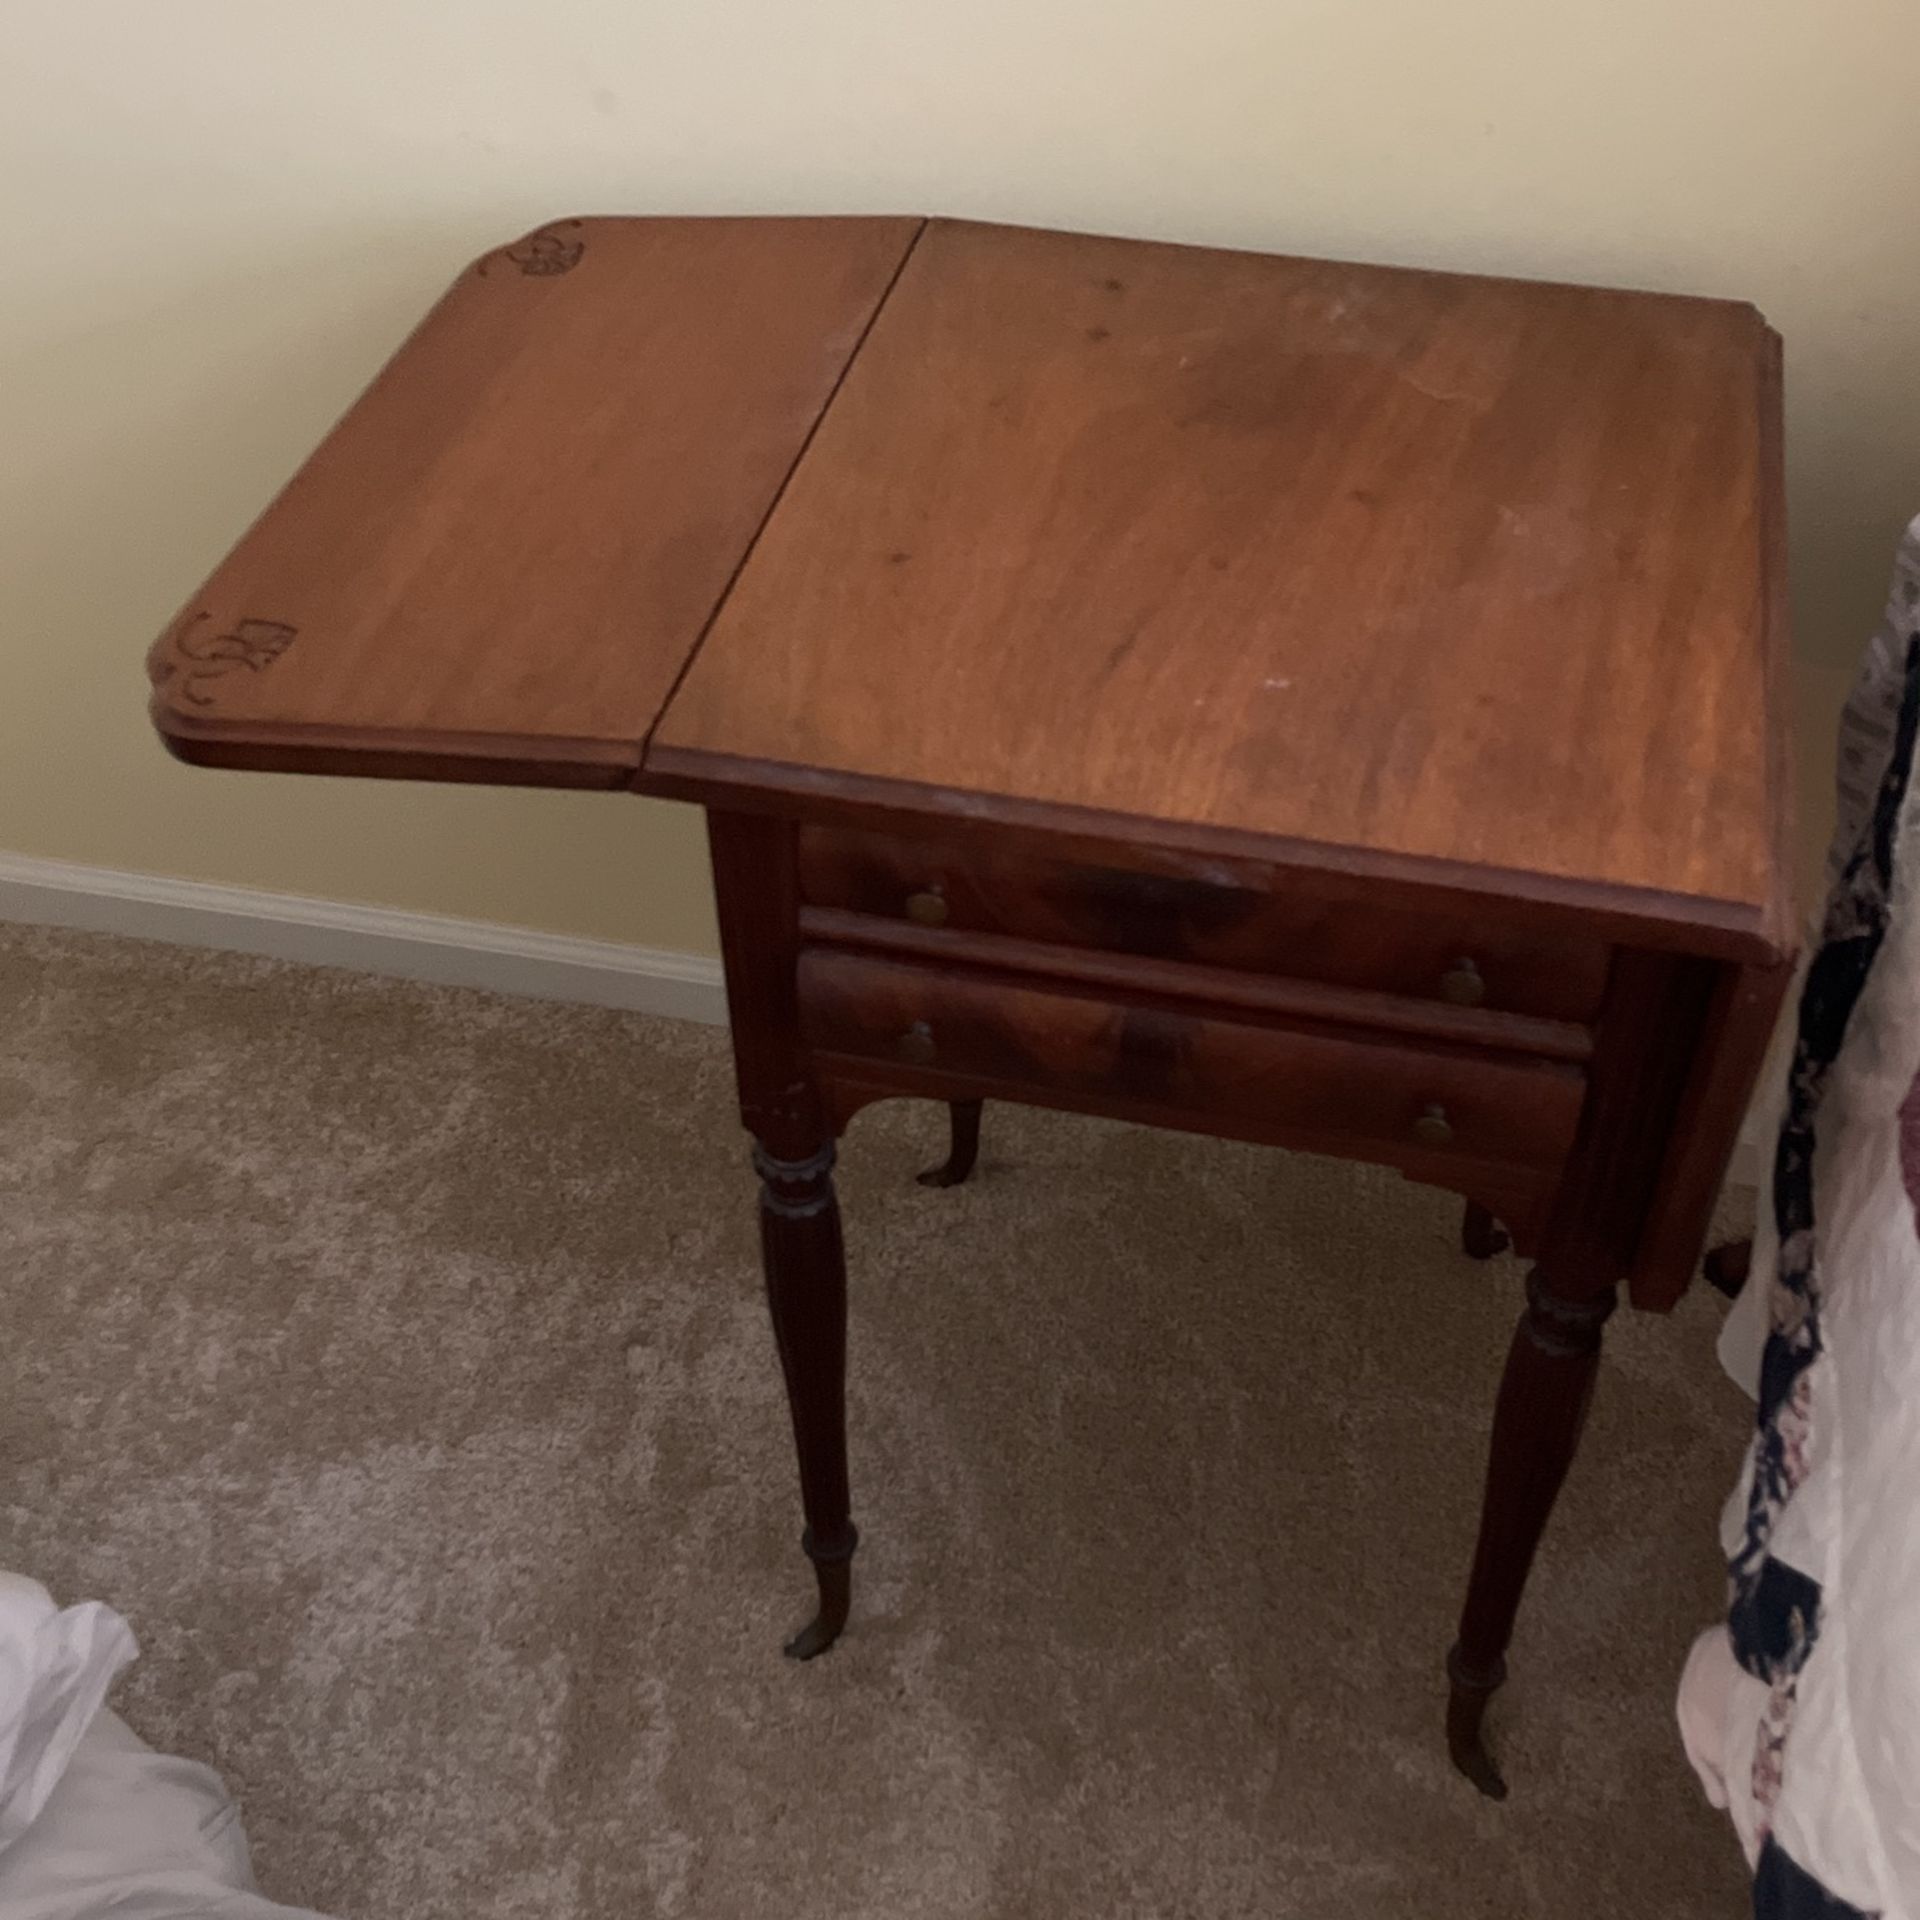 I Believe It's A Sewing Table. We're Using As A Little End Table For Lamp.